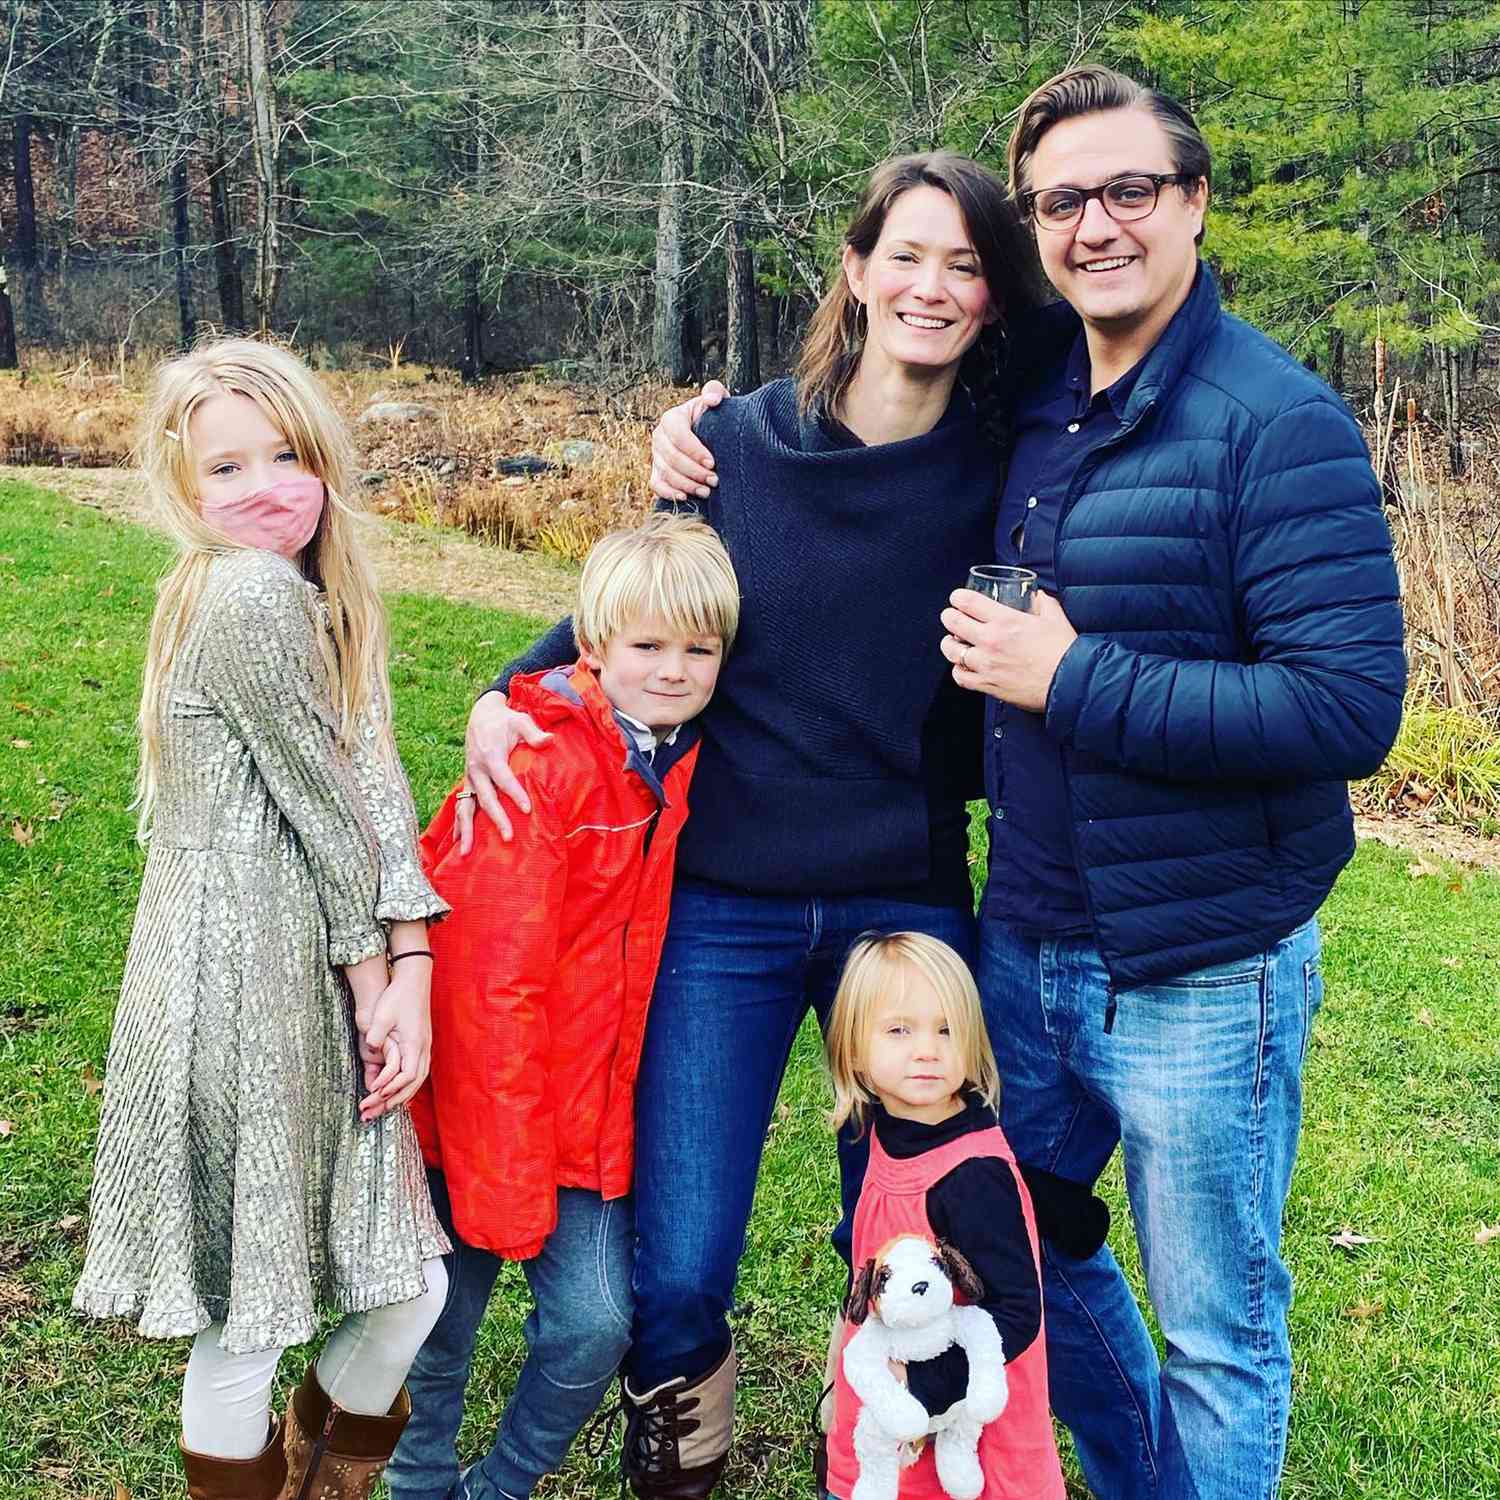 Who Is Chris Hayes' Wife? All About Kate Shaw